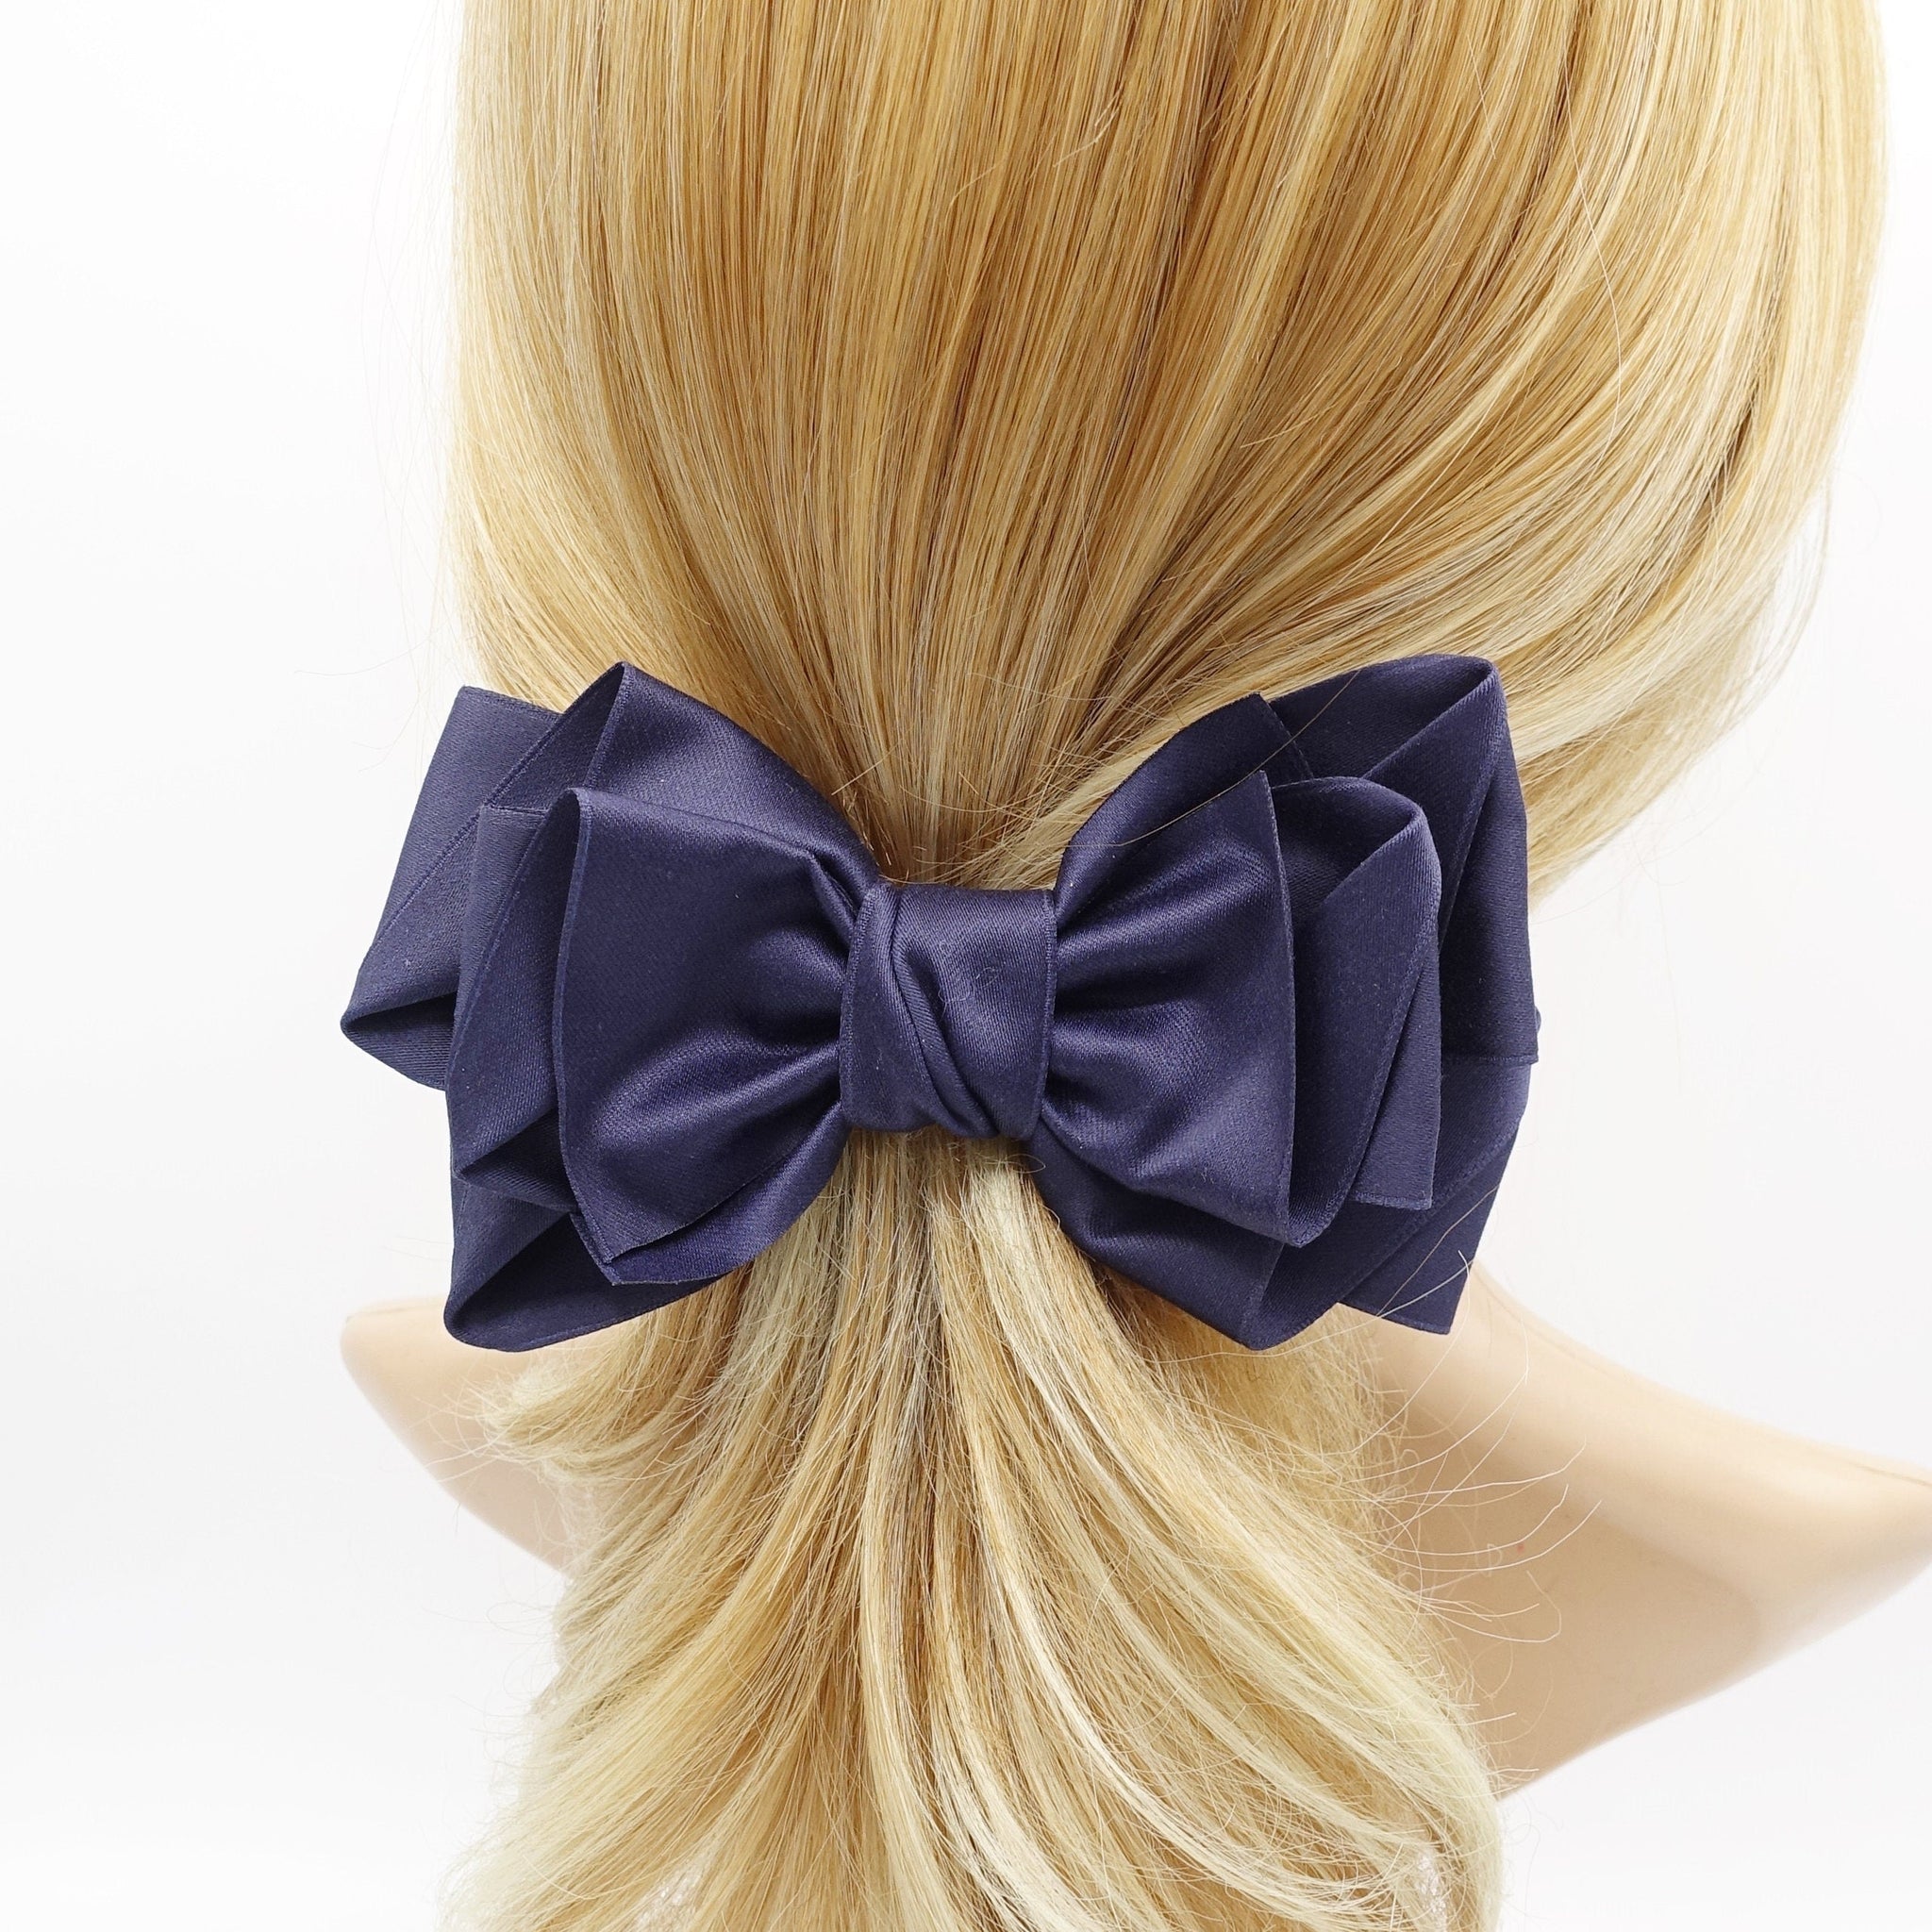 VeryShine claw/banana/barrette Navy VeryShine folded and layered hair bow normal size hair accessory for women